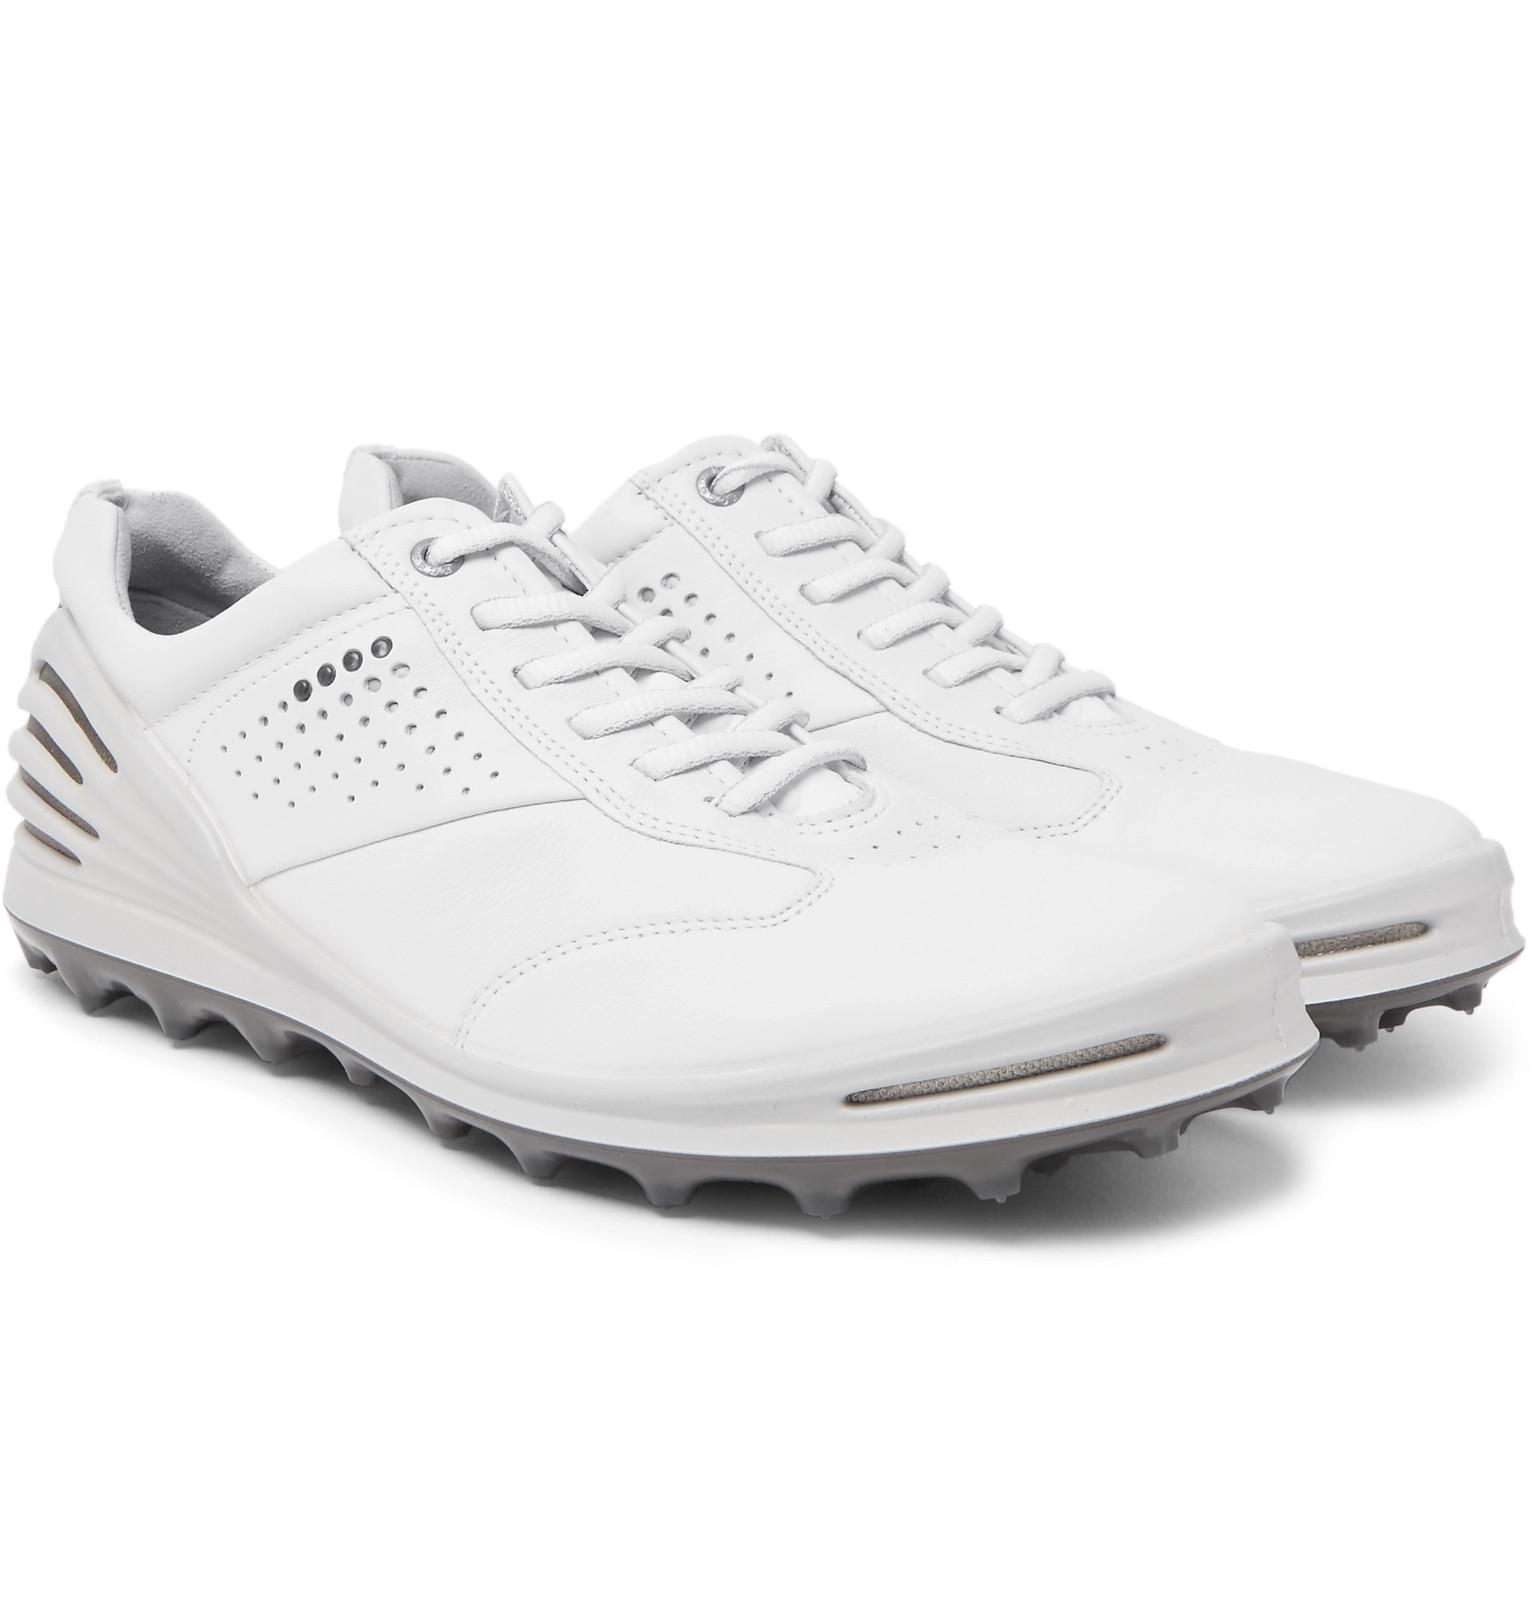 Ecco Cage Pro Hydromax Leather Golf Shoes in White for Men - Lyst